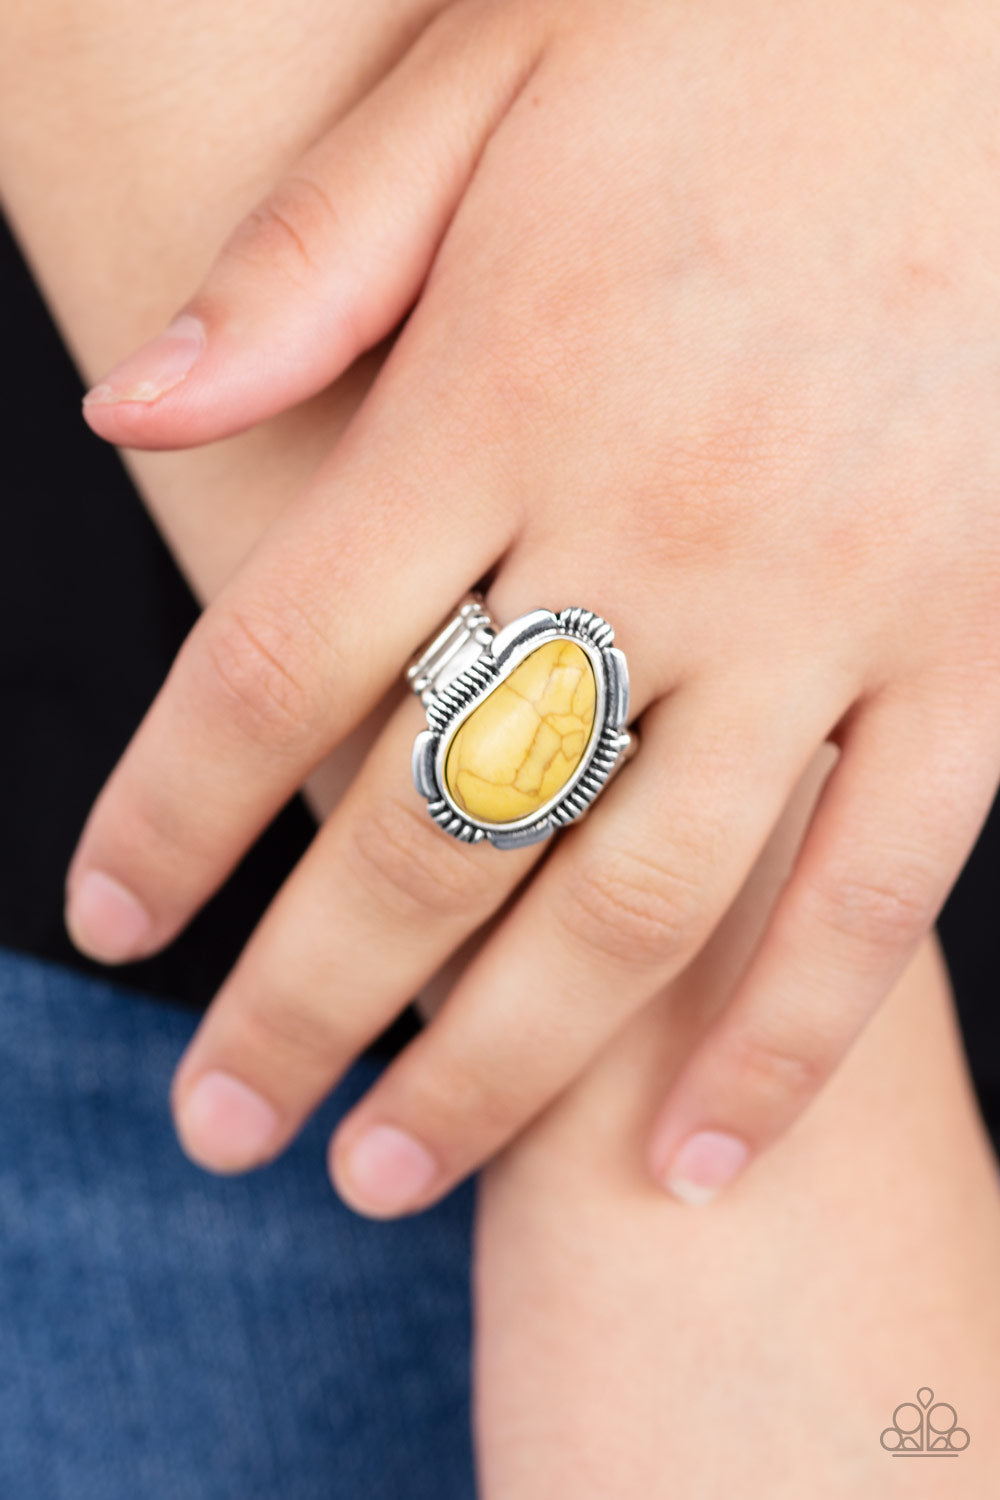 Paparazzi Mineral Mood - Yellow - Teardrop Stone - Silver Ring - $5 Jewelry with Ashley Swint